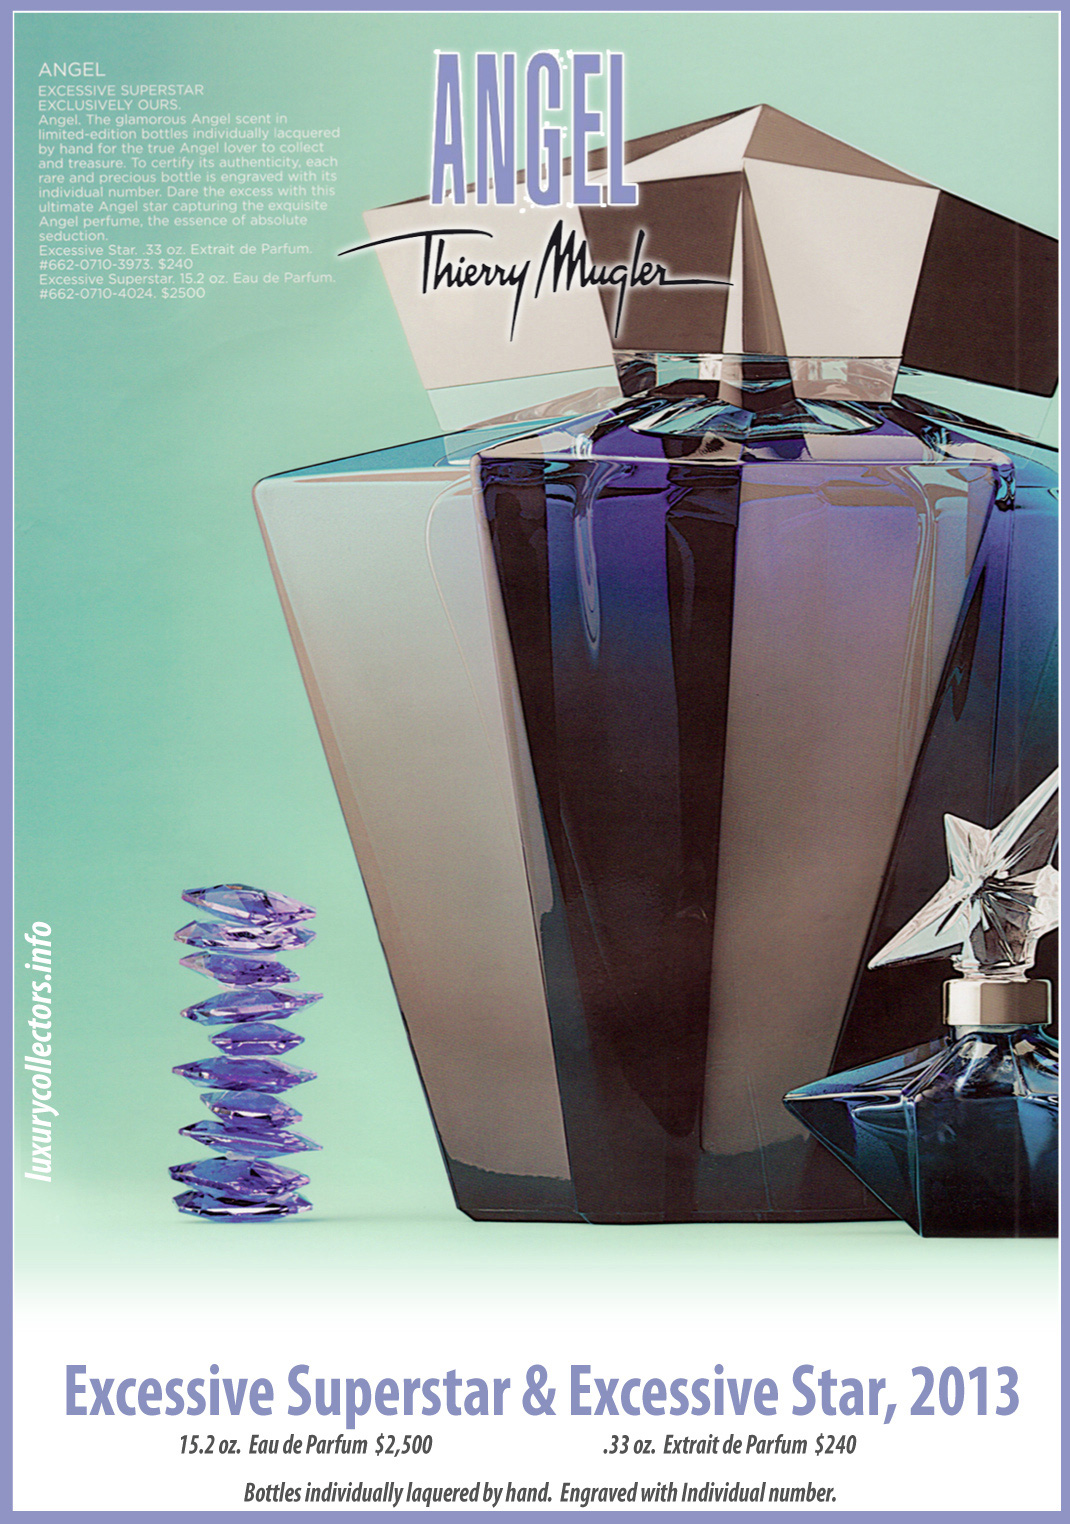 Thierry Mugler Angel Perfume Star (Etoile) Bottle Collecting 2013 Angel Excessive Stars Superstar